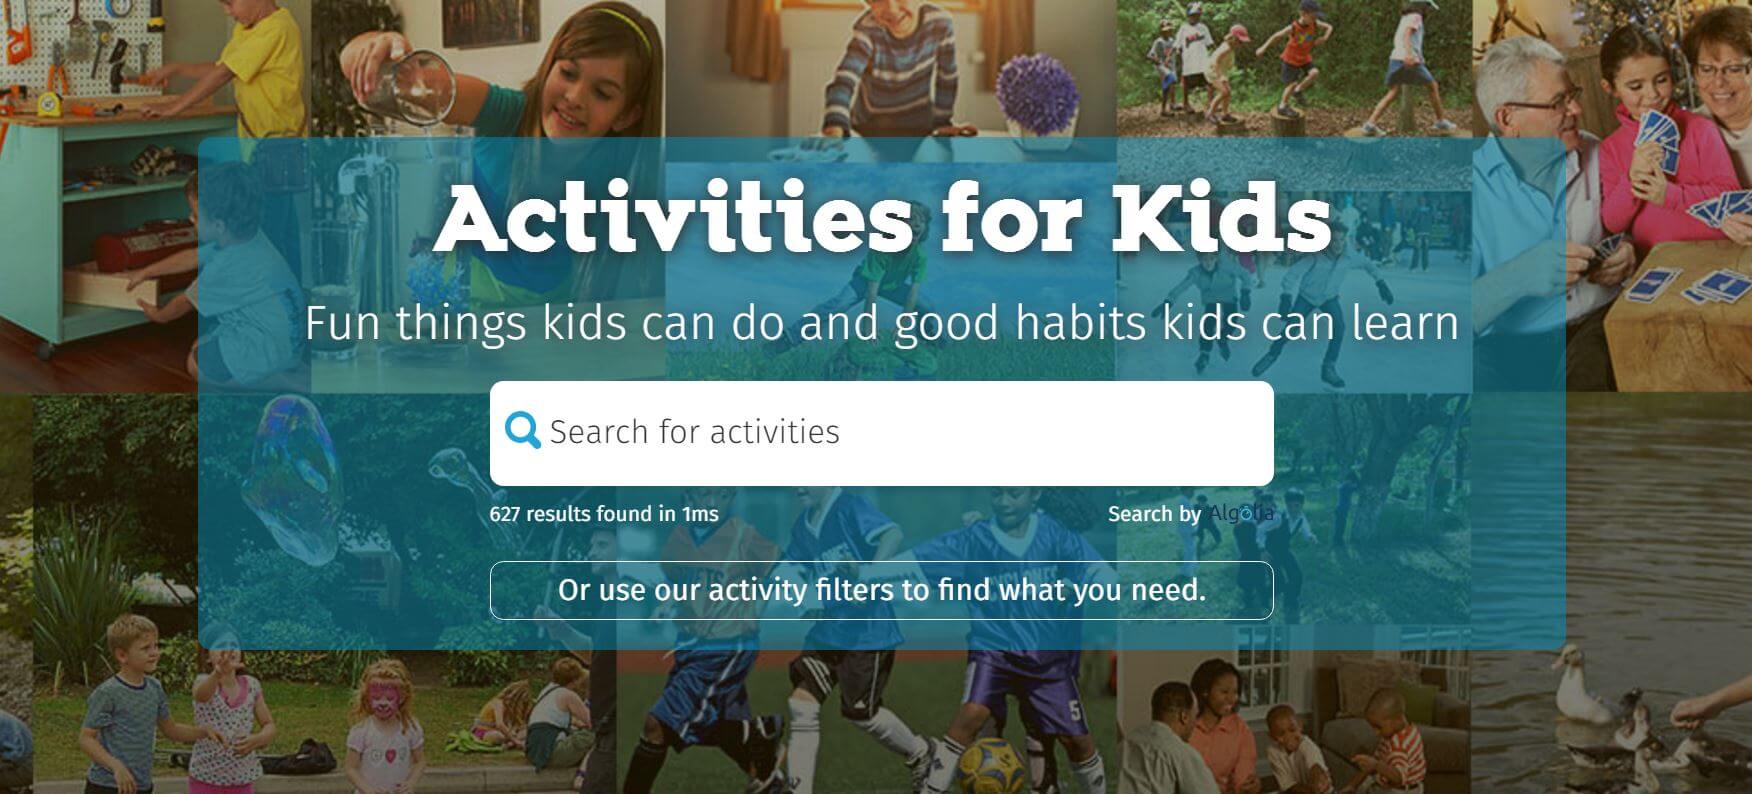 Activities for Kids Search Tool 